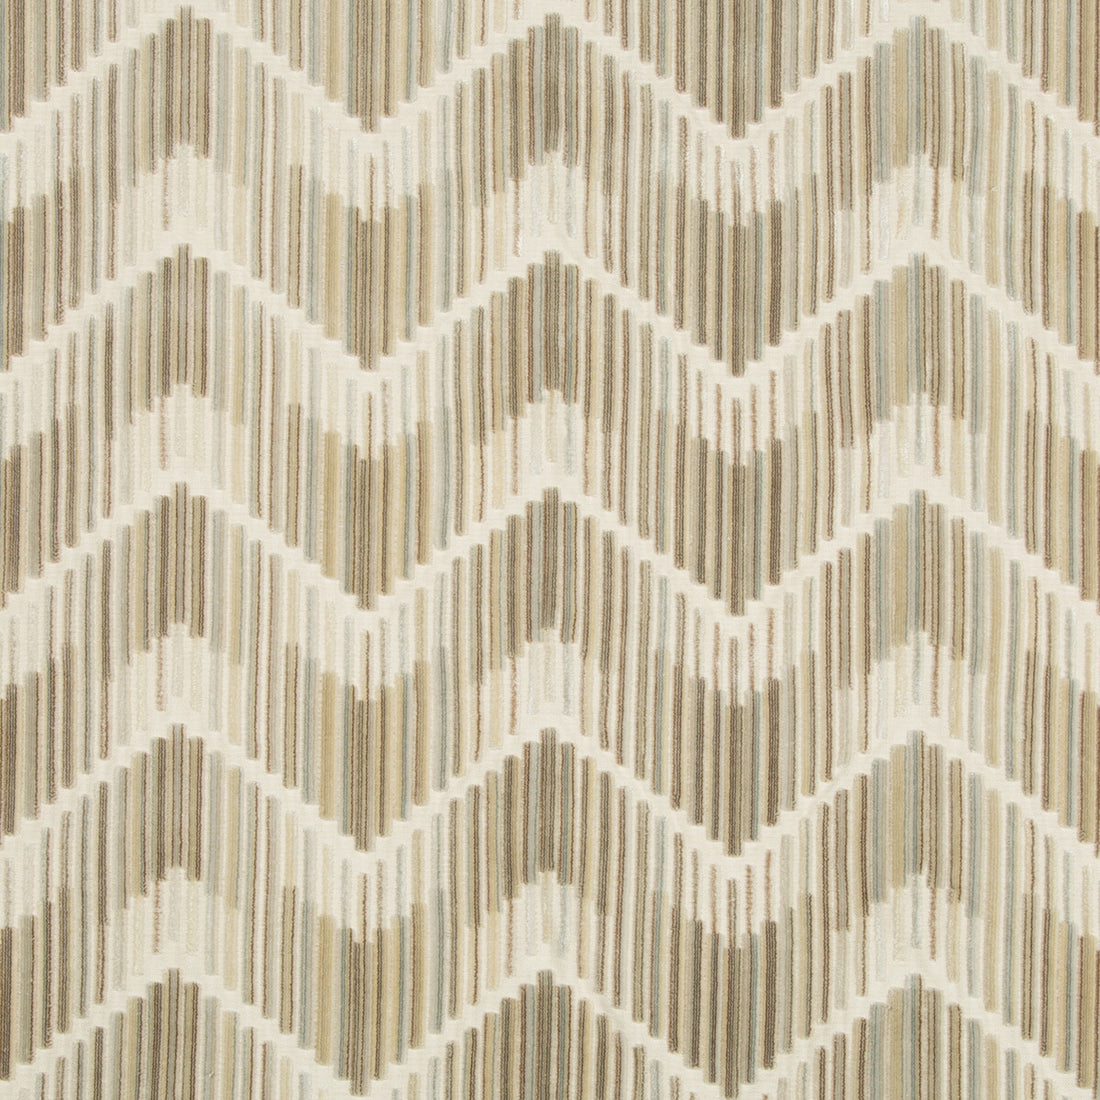 Highs And Lows fabric in stone color - pattern 34553.116.0 - by Kravet Couture in the Artisan Velvets collection